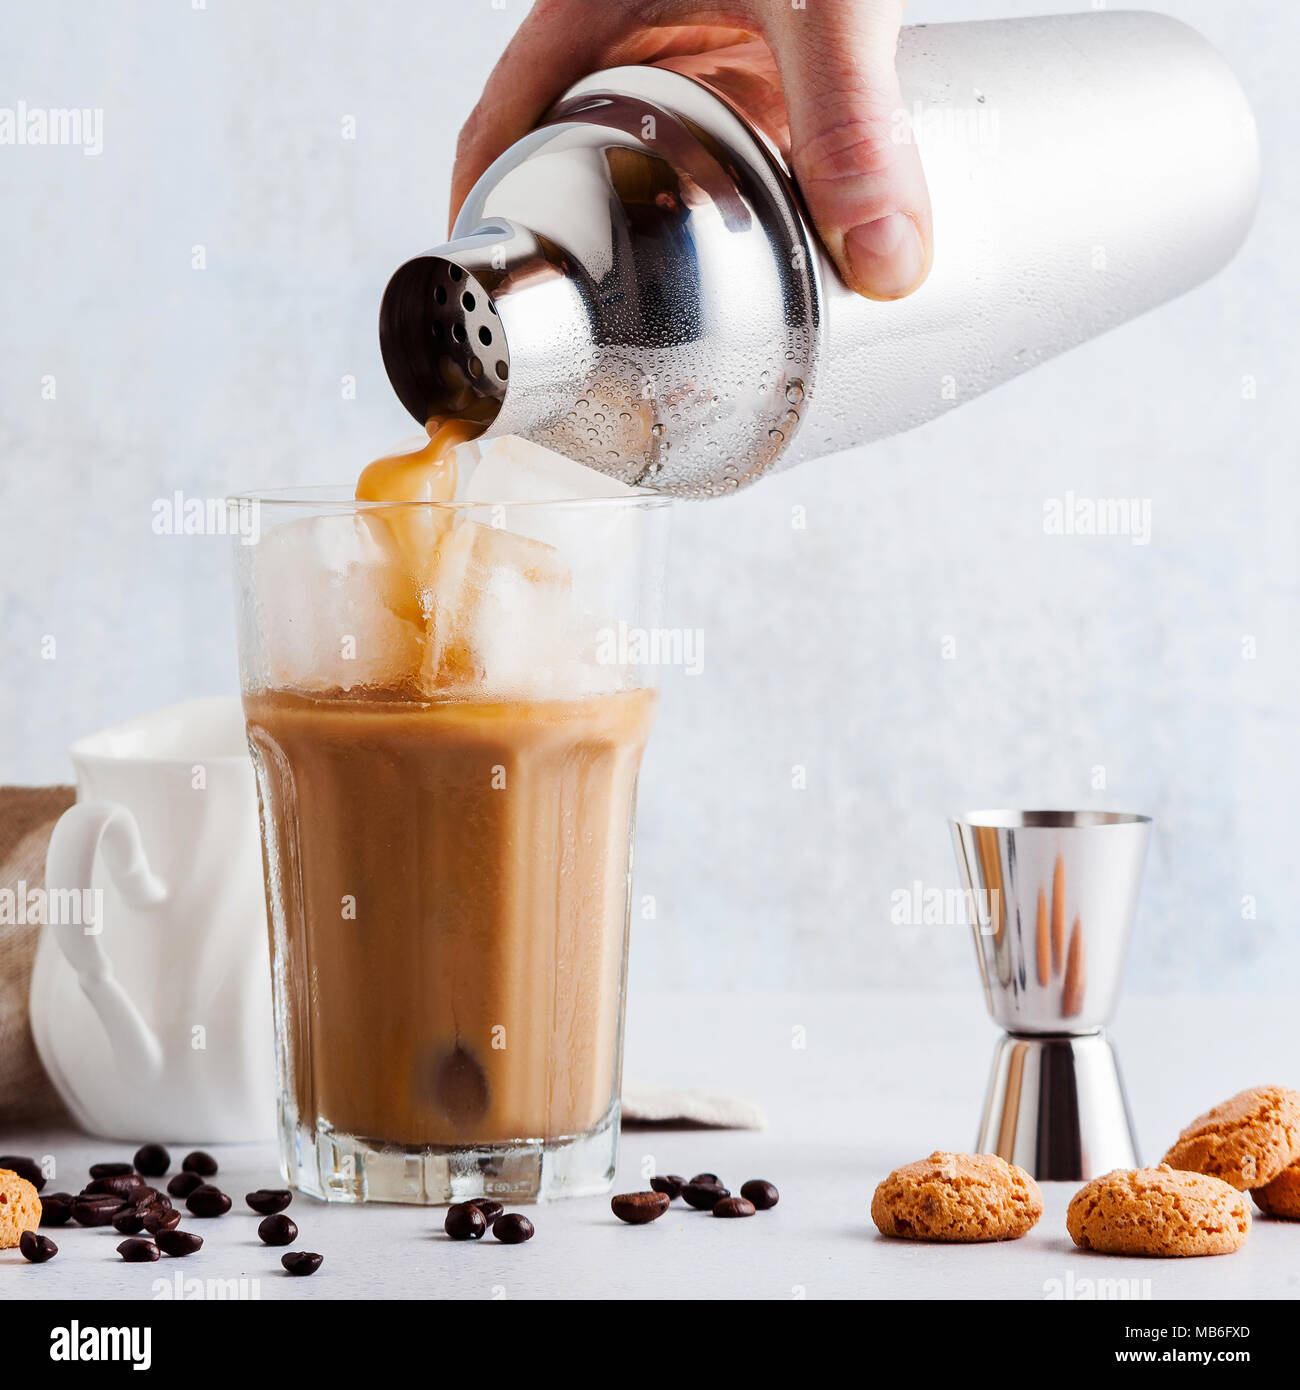 https://c8.alamy.com/comp/MB6FXD/pour-the-frappe-from-the-shaker-into-a-tall-glass-beautiful-and-clean-composition-with-coffee-beans-and-amaretti-biscuits-MB6FXD.jpg